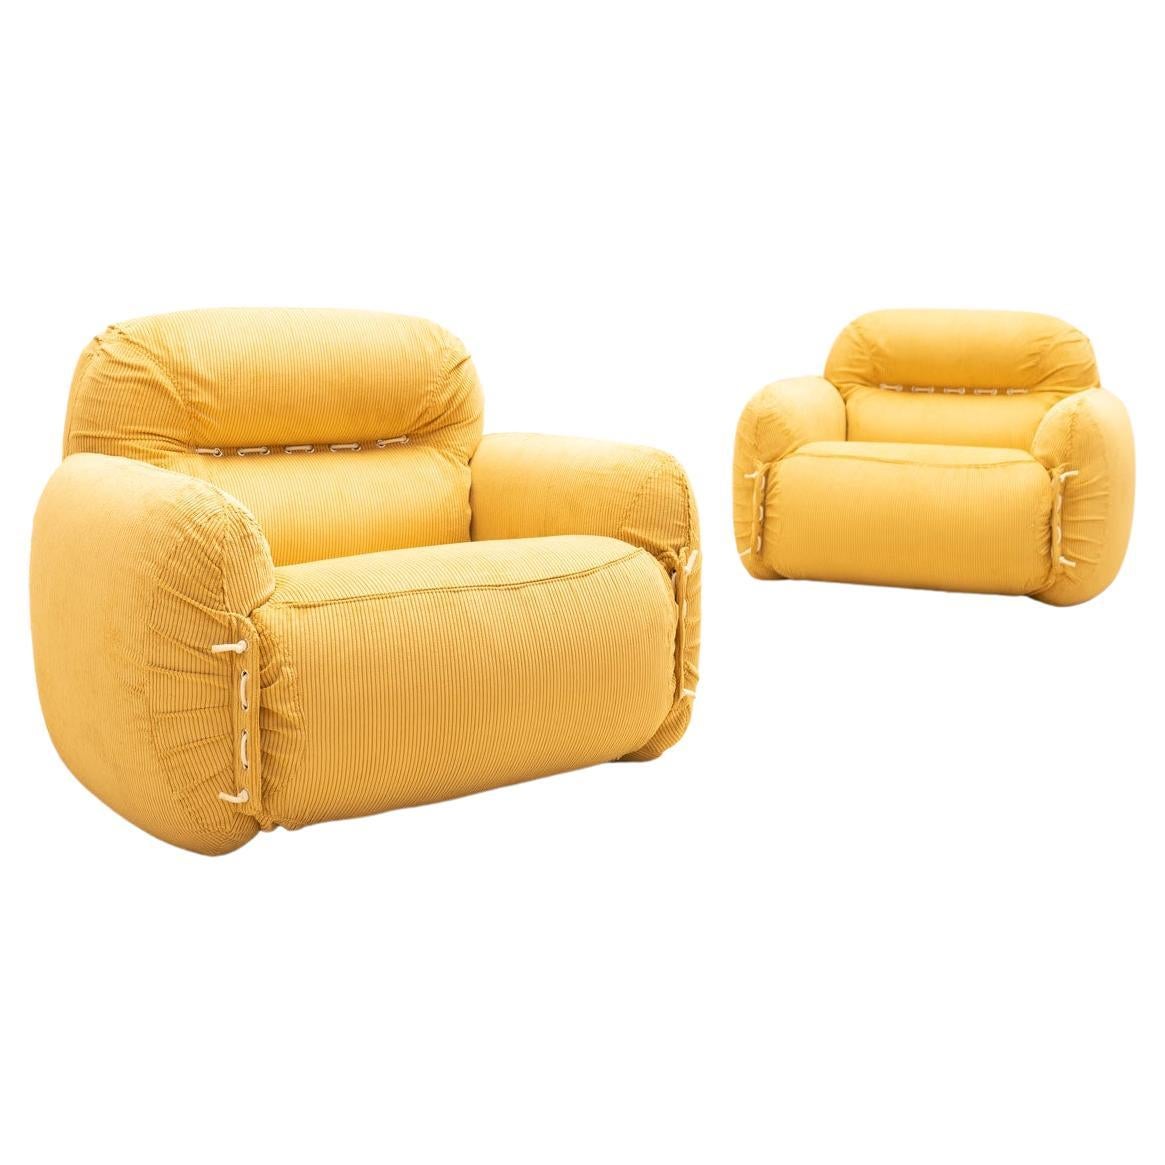 A very comfortable design with eye-catching colors, these 1970s Italian armchairs have been recently upholstered in vibrant yellow corduroy. Their generous shape invites you to sit and lounge, offering ultimate comfort. Rope detailing along the